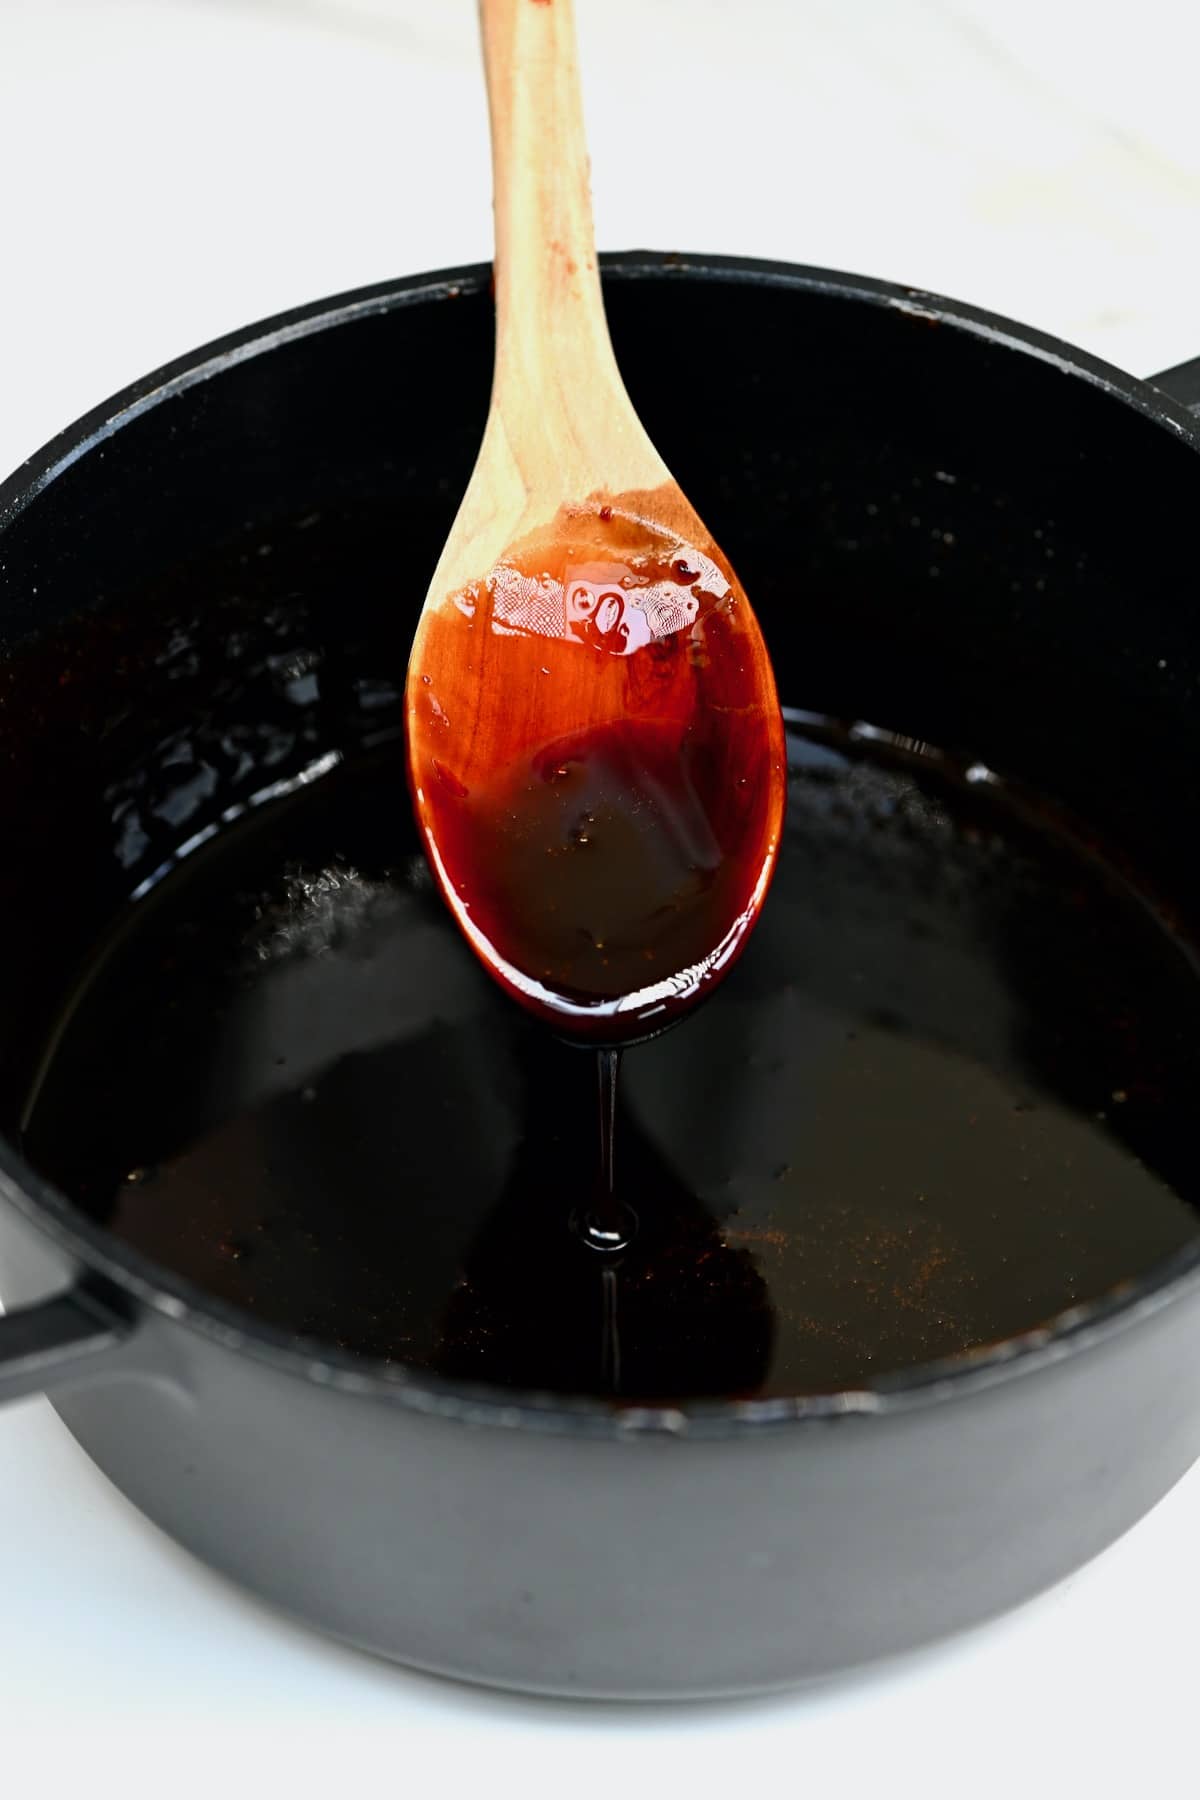 A spoon dripping some date syrup in a pot